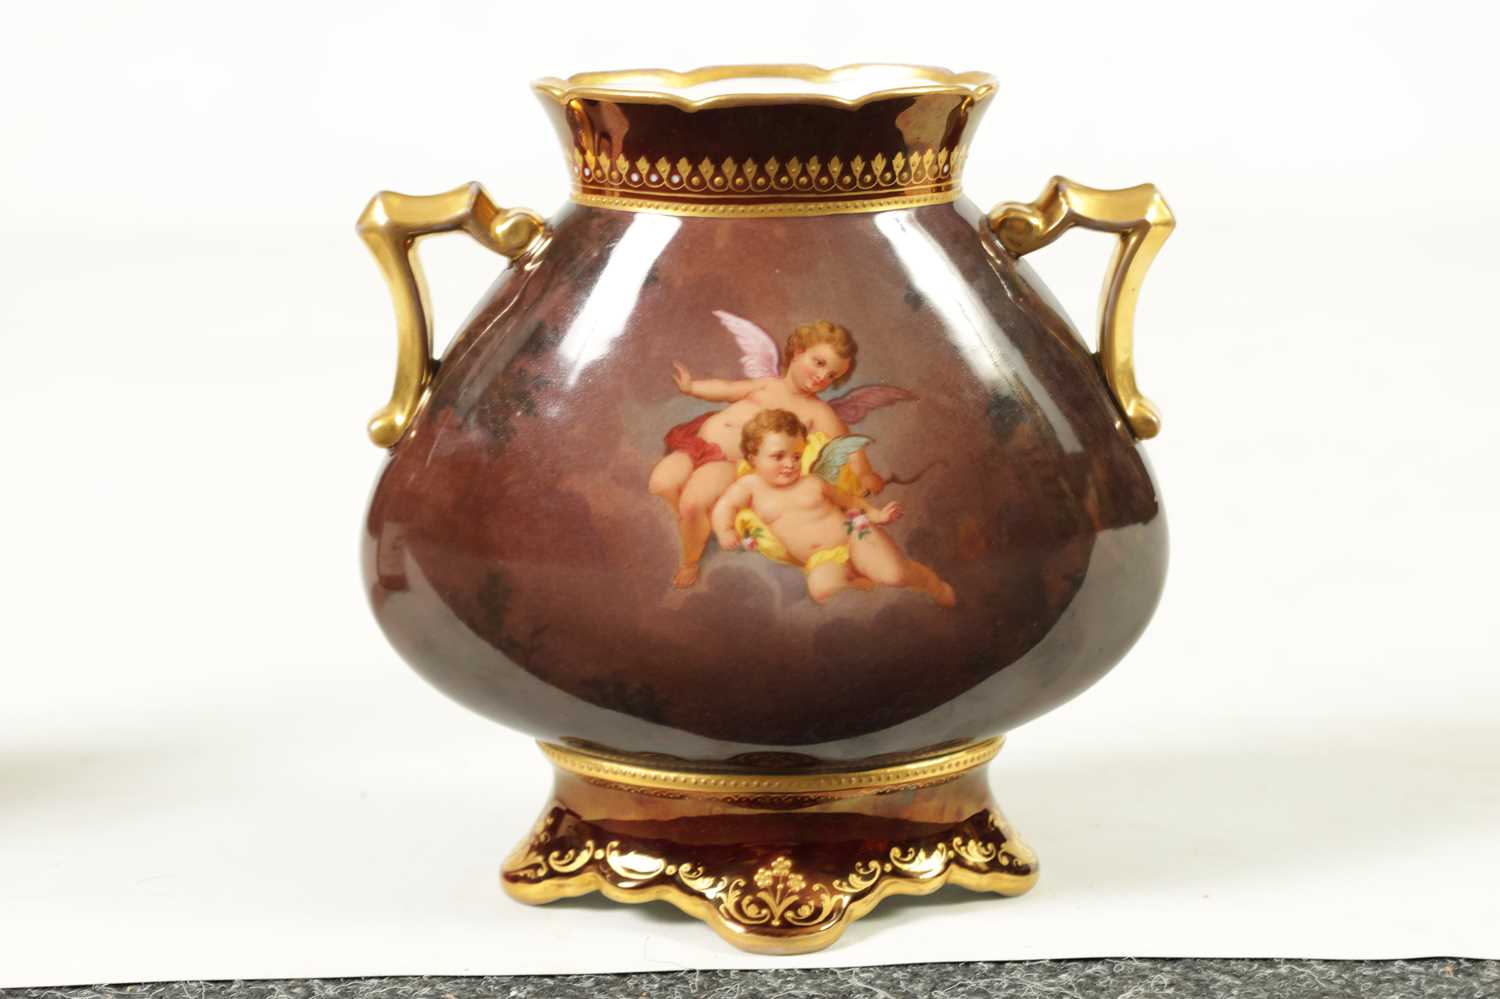 A LATE 19TH/EARLY 20TH CENTURY ‘VIENNA’ GILT TWO-HANDLED FLATTENED OVOID CABINET VASE - Image 6 of 10